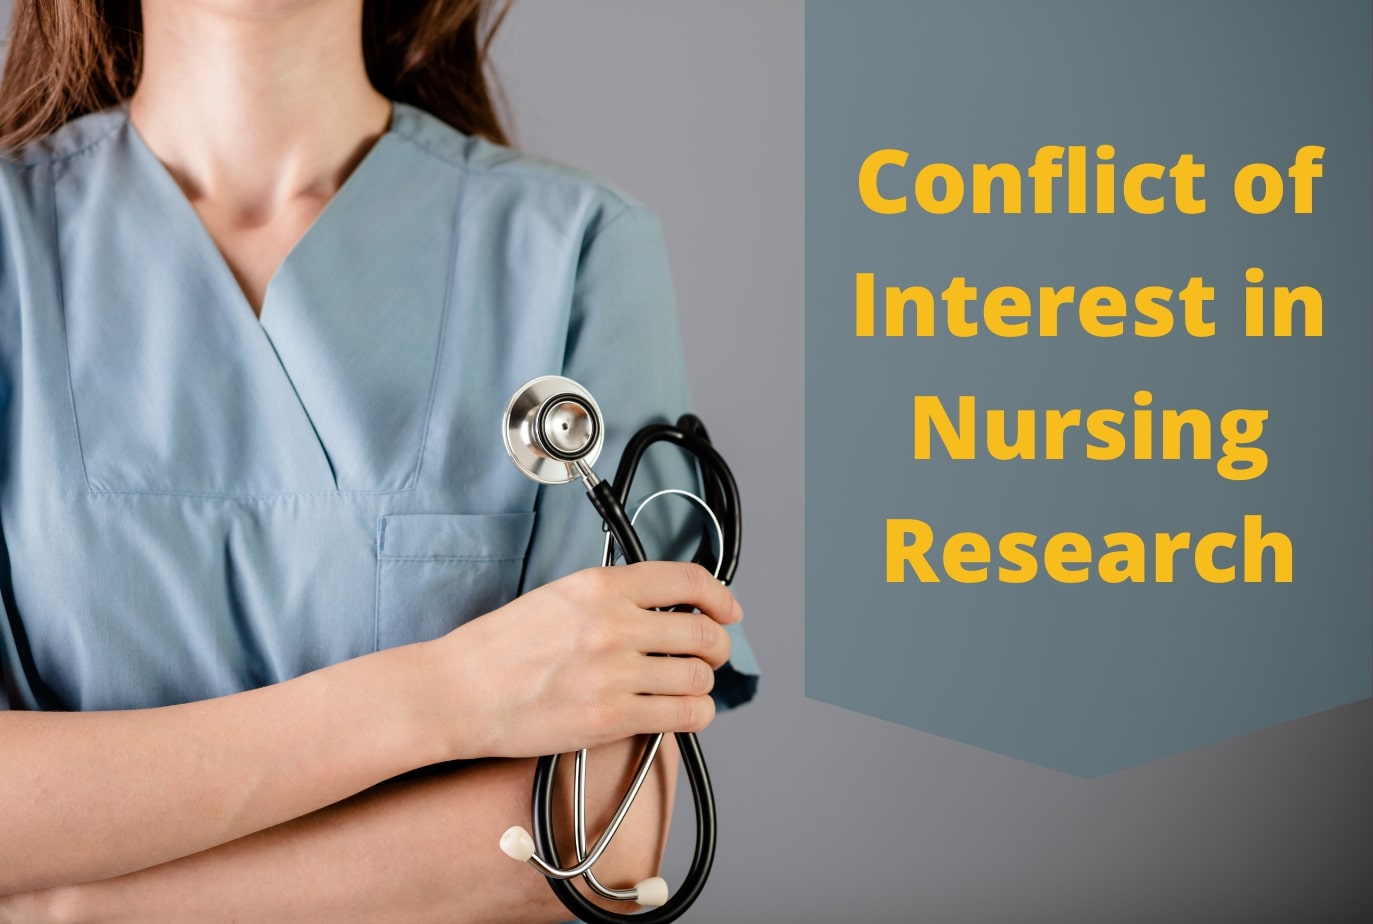 Conflict of Interest in Nursing Research